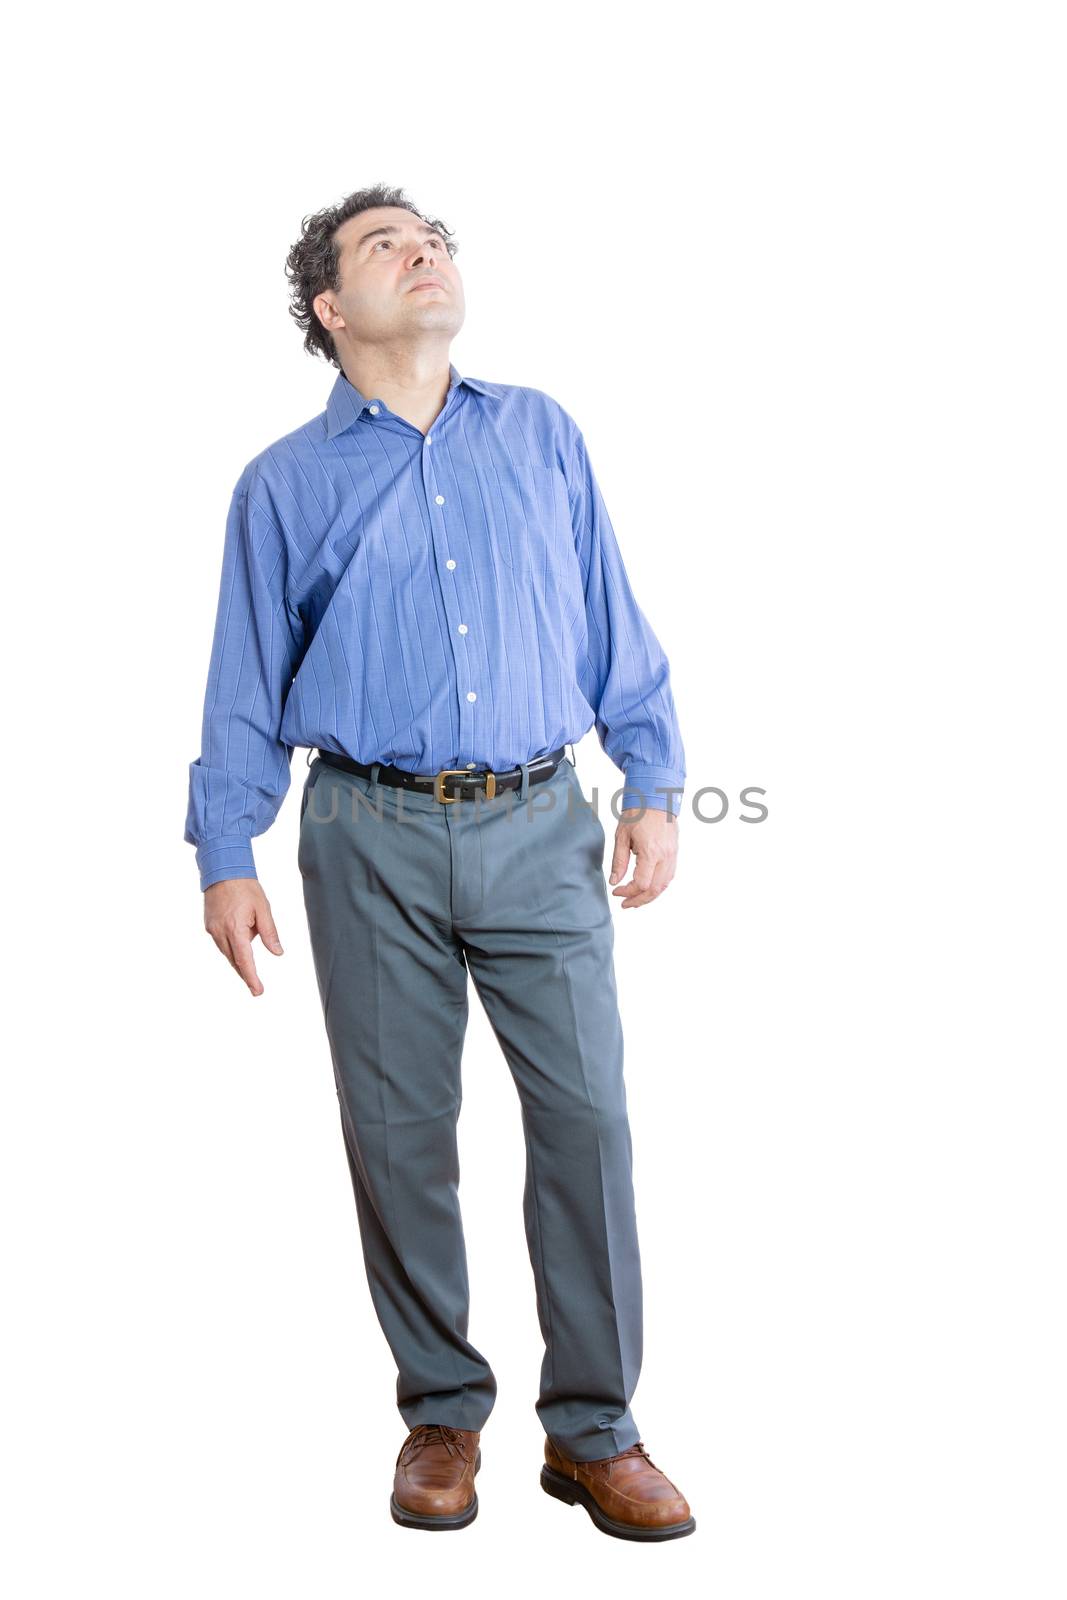 Full Length Shot of a Pensive Middle-Aged Office Man Looking Up High Against White Background.